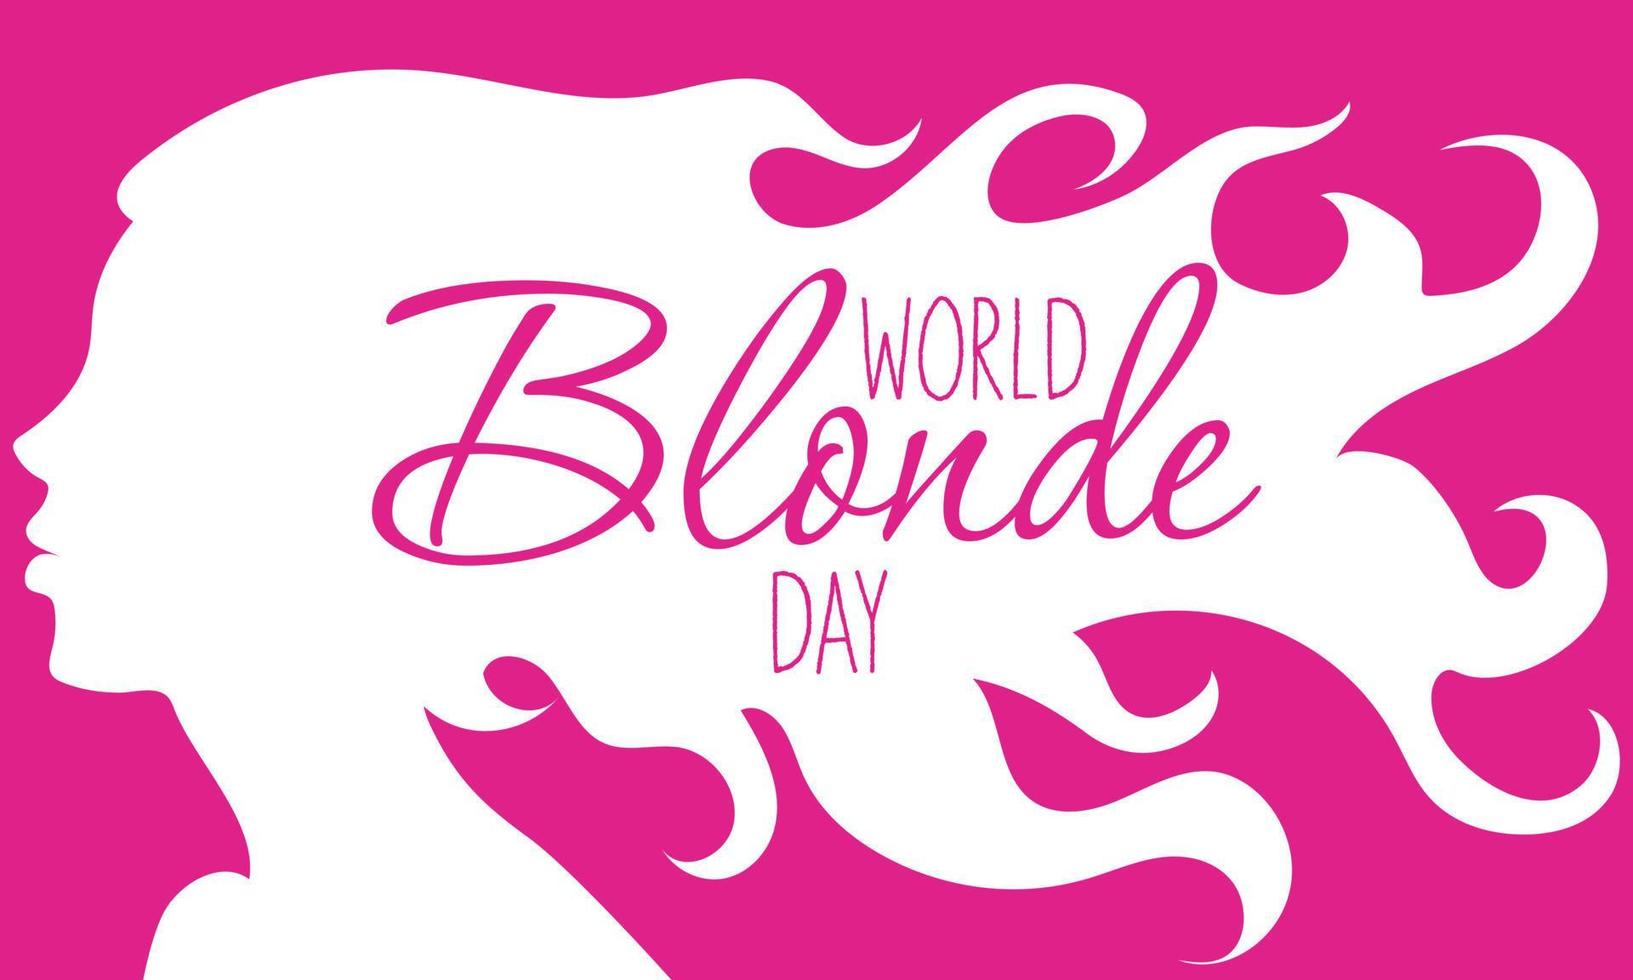 World Blonde Day. The silhouette of a beautiful woman with hair flowing in the wind. Template for postcards, greetings, flyers, banners for beauty salons, hairdressers. Barbie color with white outline vector